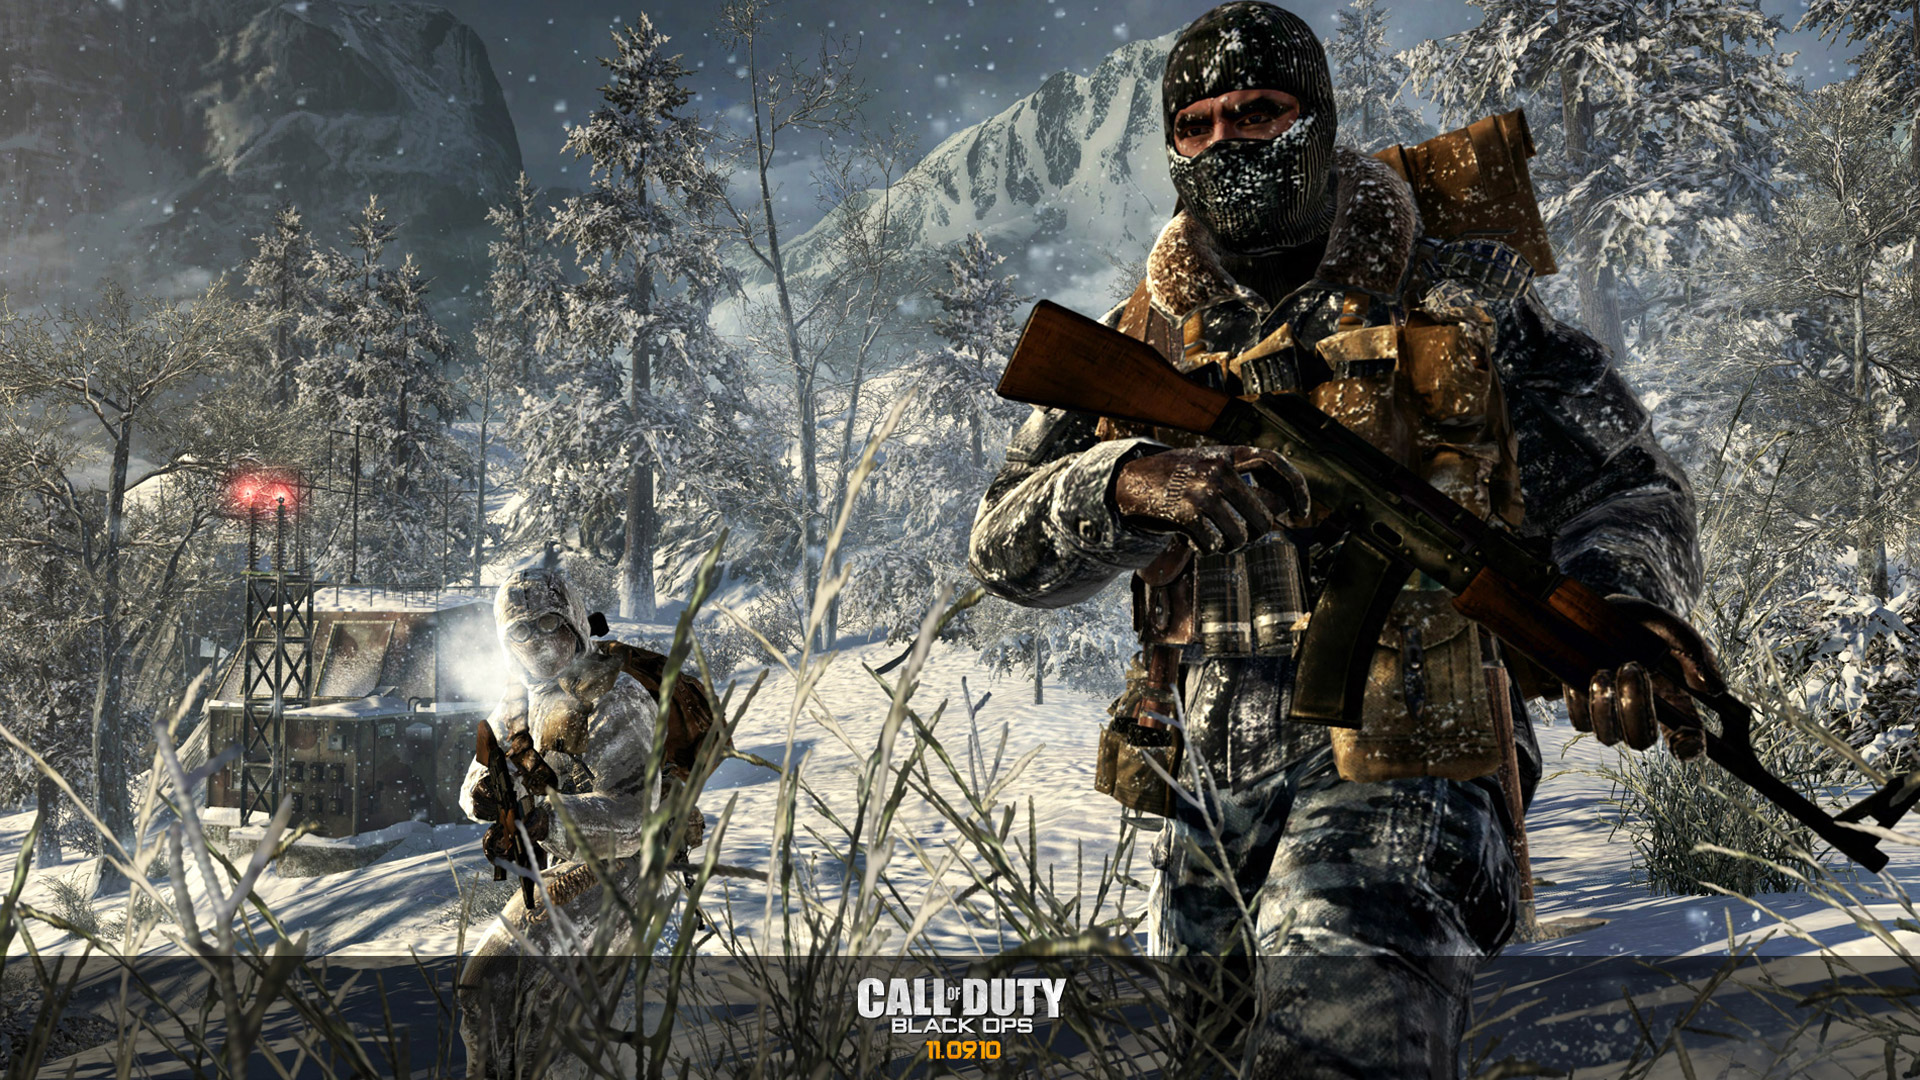 Call of Duty Black Ops Wallpaper in 1920x1080